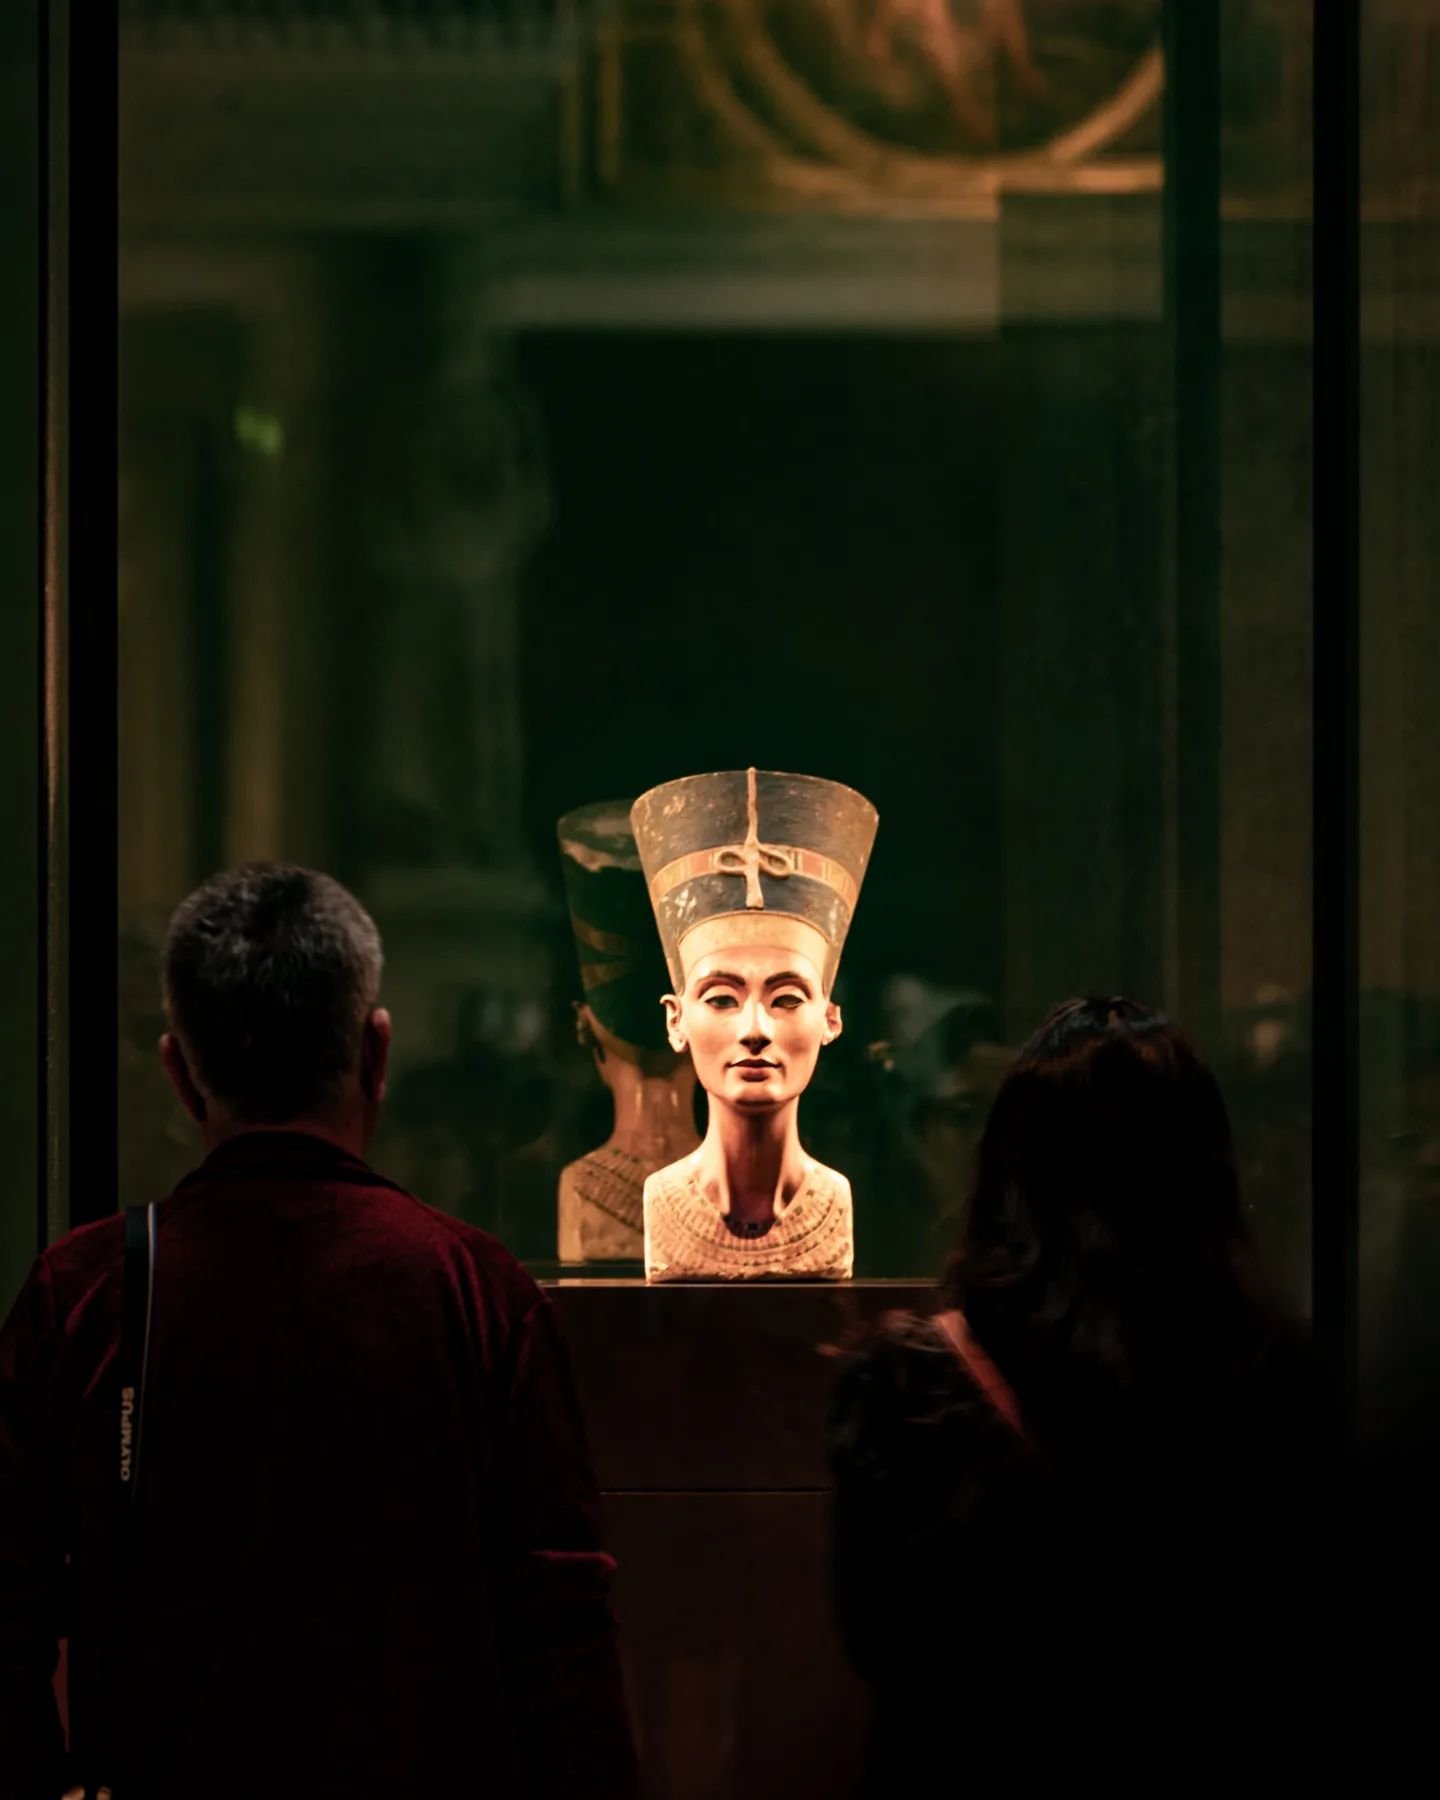 The one who does not like to have her photograph taken: Nefertiti.
.
.
.
.
.
#berlin #berlinberlin #visitberlin #citylife #igcity #architecturephotography #berlinstagramm #cityscape #europeancities #germanarchitecture #igbuildings #topeuropephoto #il